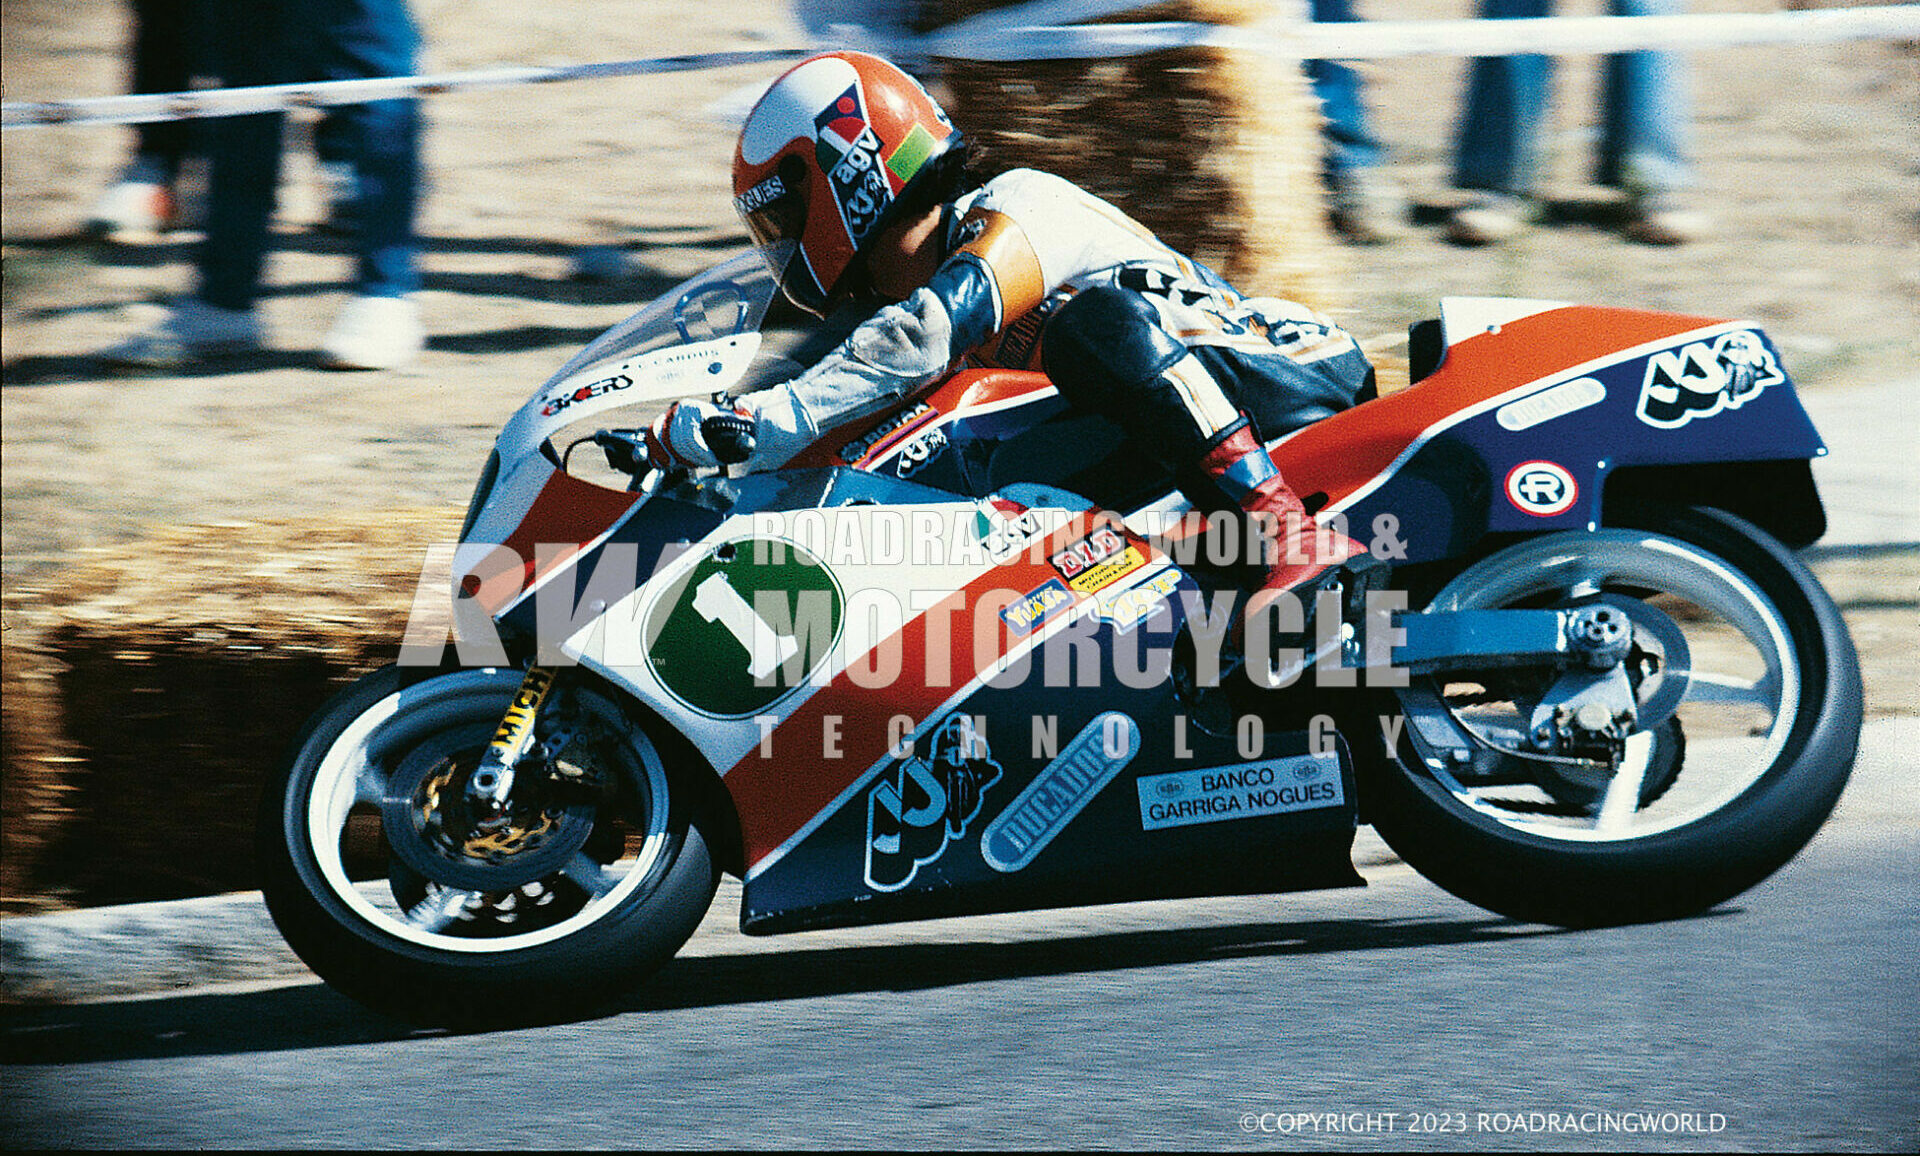 Carlos Cardus earned his #1 plate racing a Kobas in the 1983 250cc European Championship. He's seen here on a street circuit at a 1984 European Championship round. Photo courtesy Fundacio Can Costa.